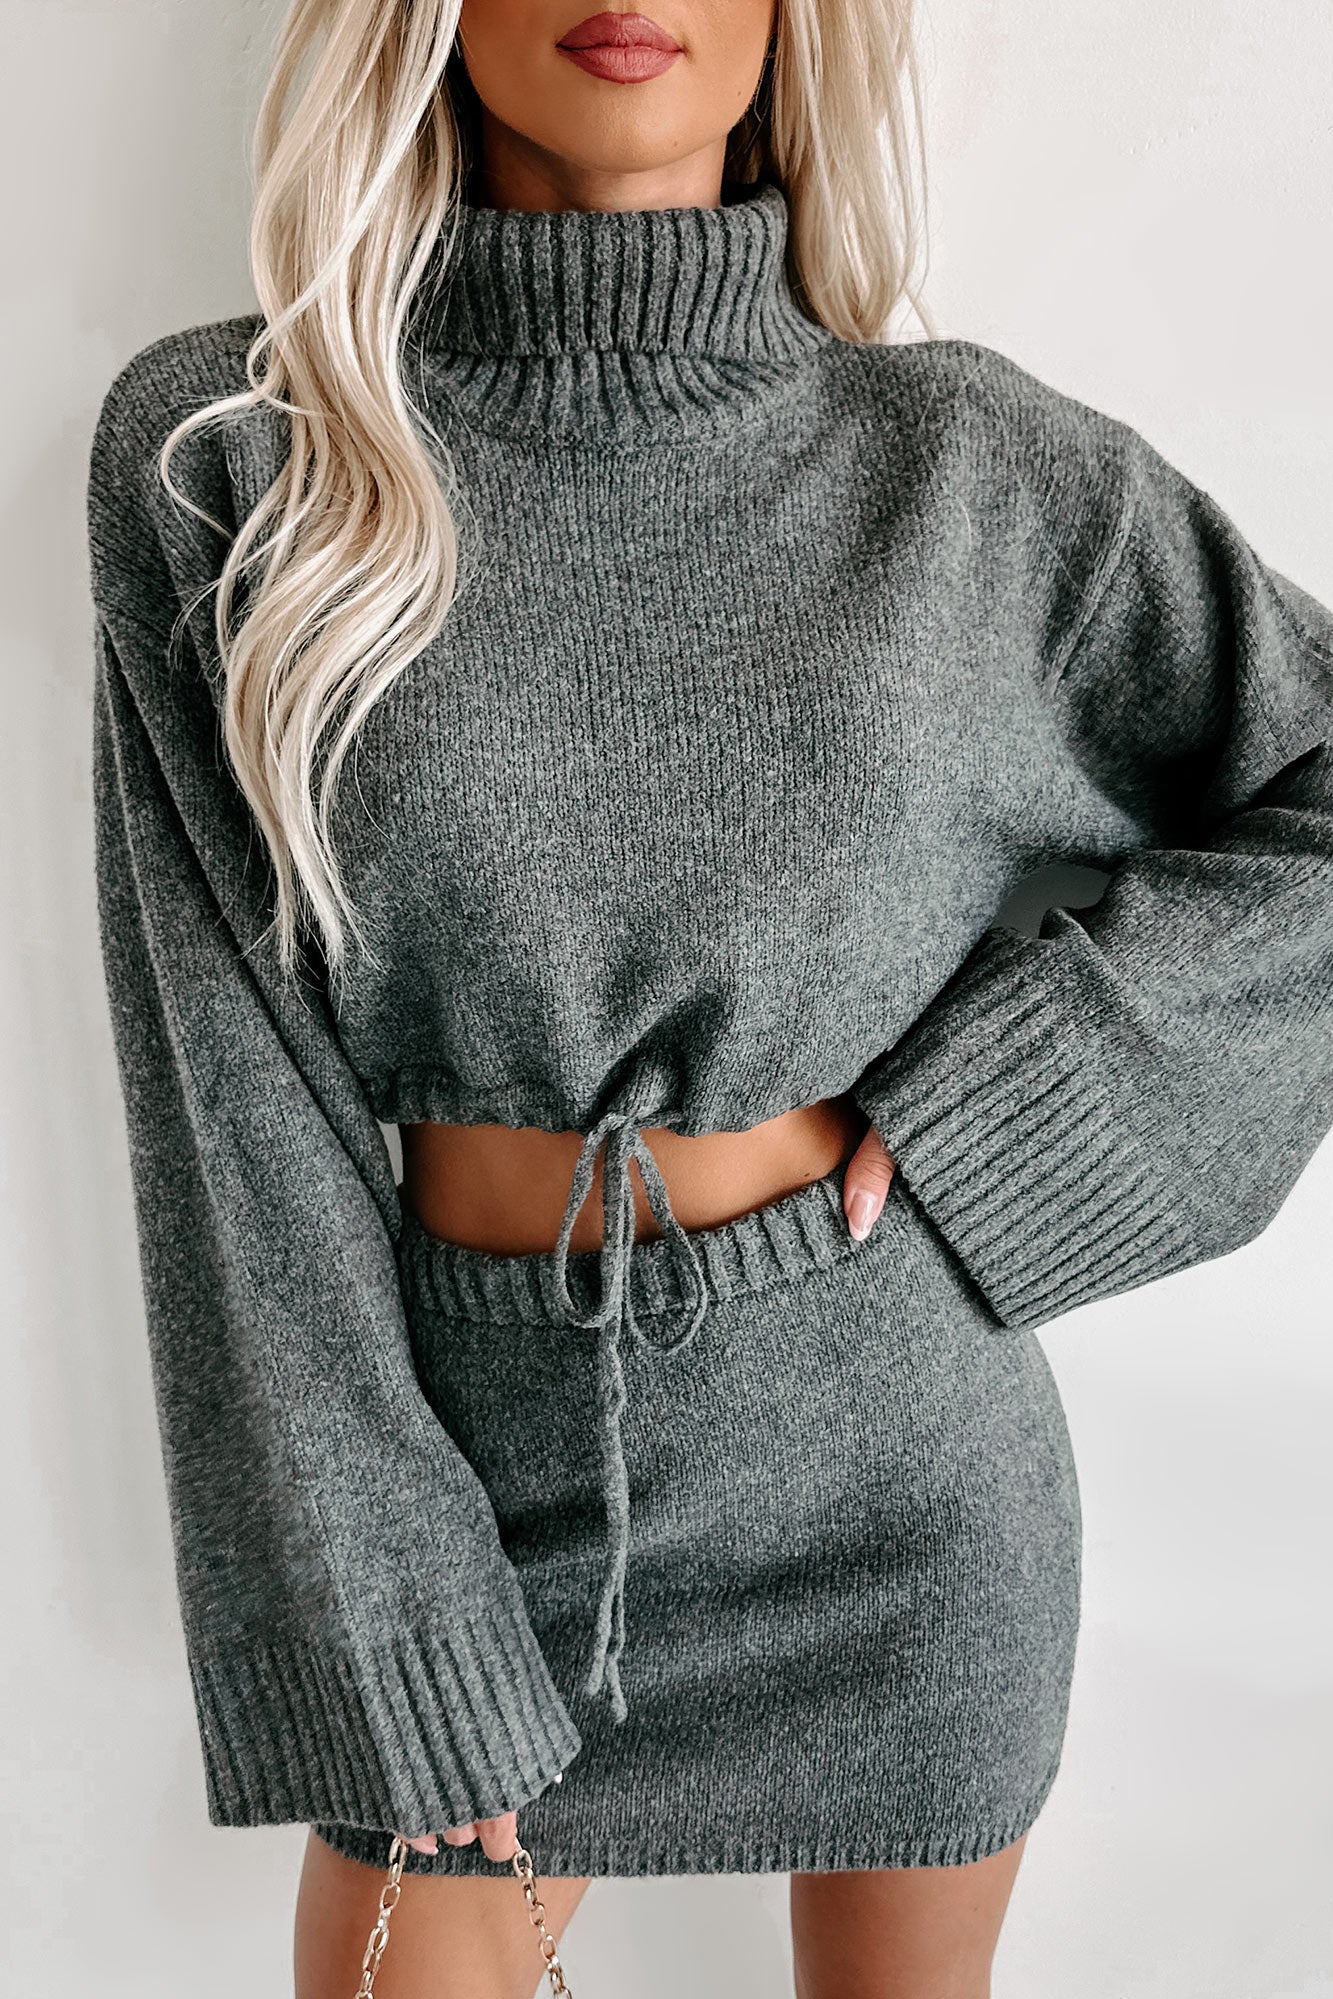 Change In The Weather Sweater Knit Crop Top & Skirt Set (Charcoal) - NanaMacs